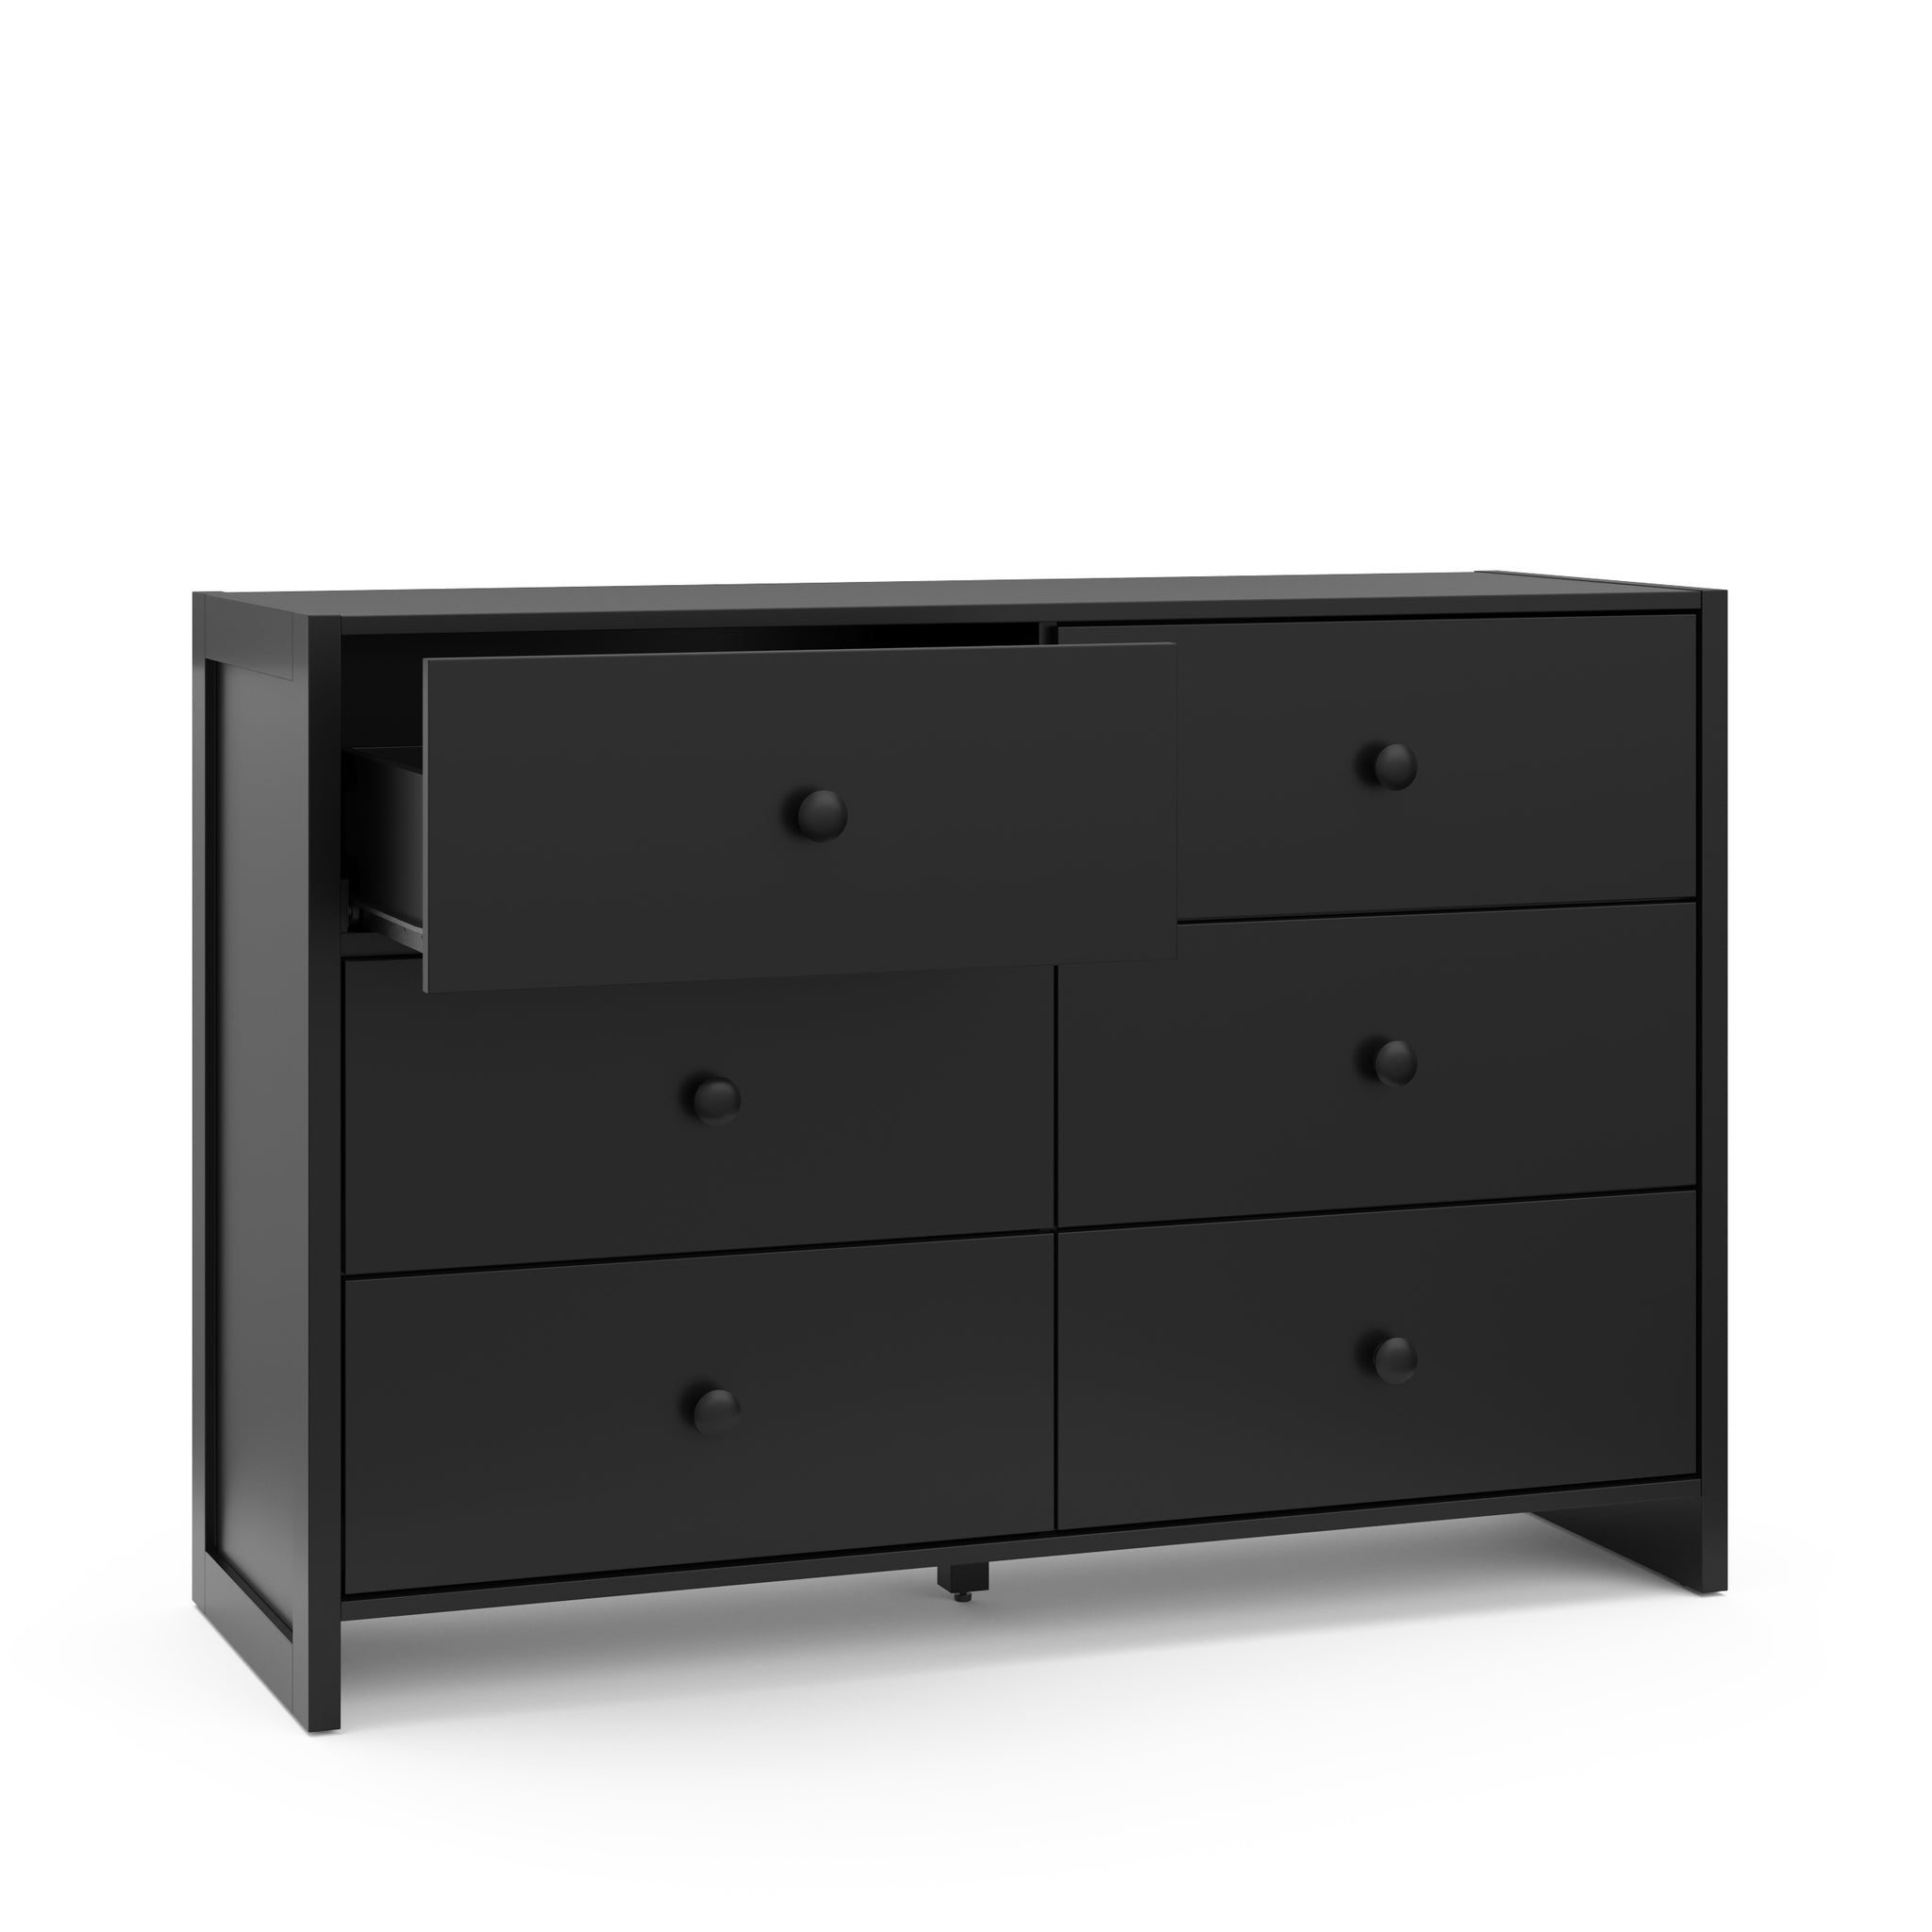 Angled view of black dresser with one open drawer